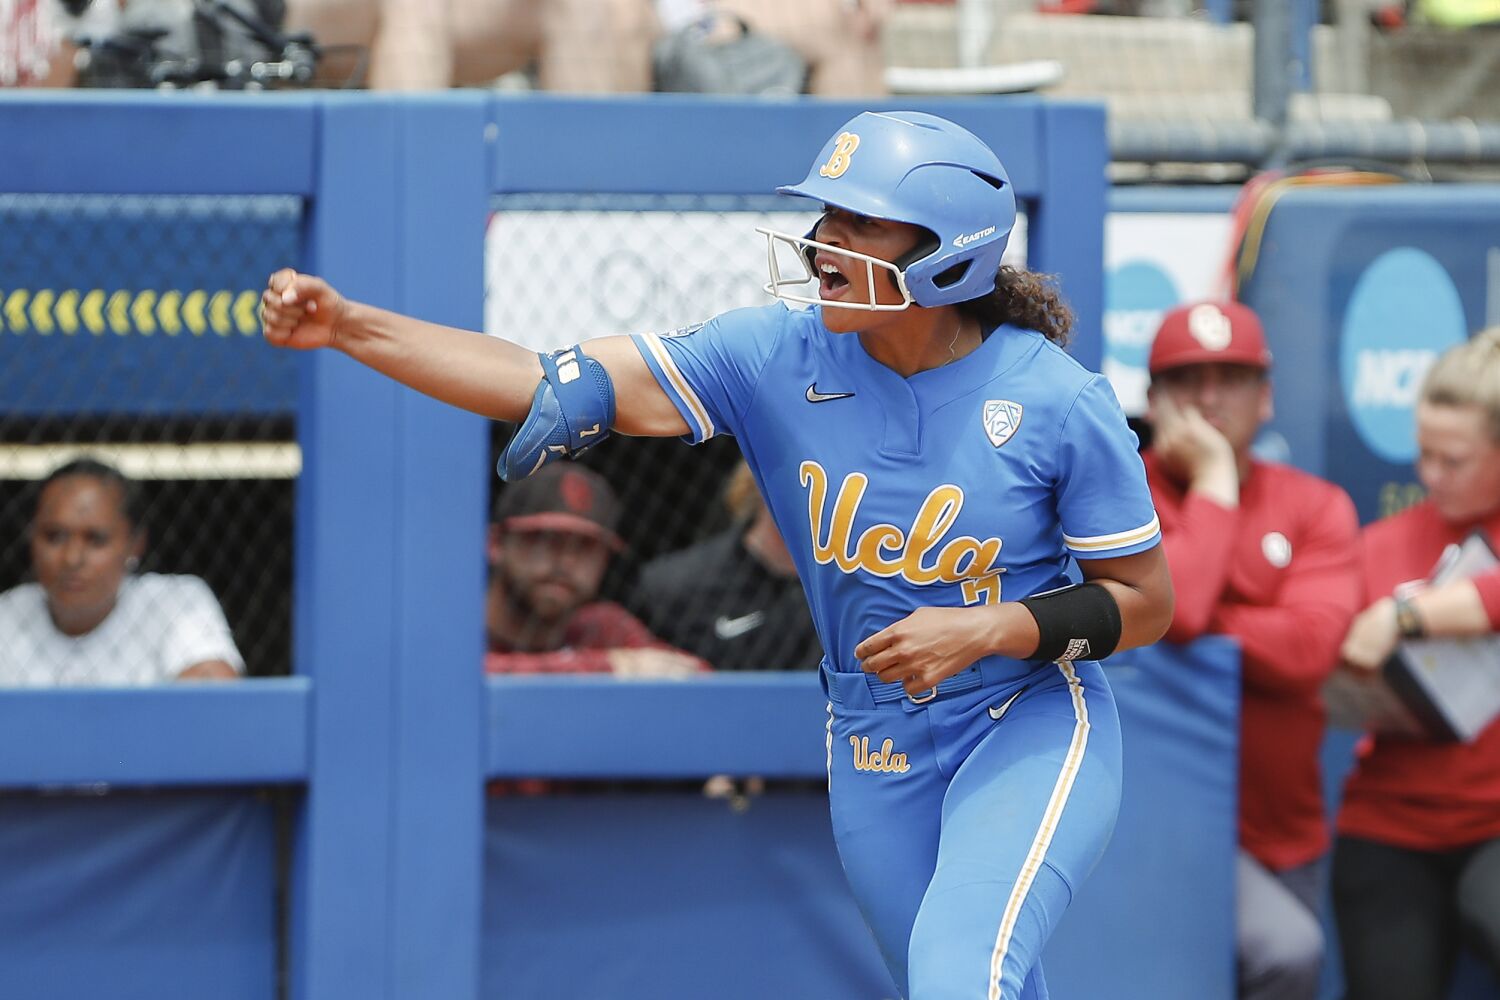 UCLA softball chasing title with 'perfect storm' of experience and young talent